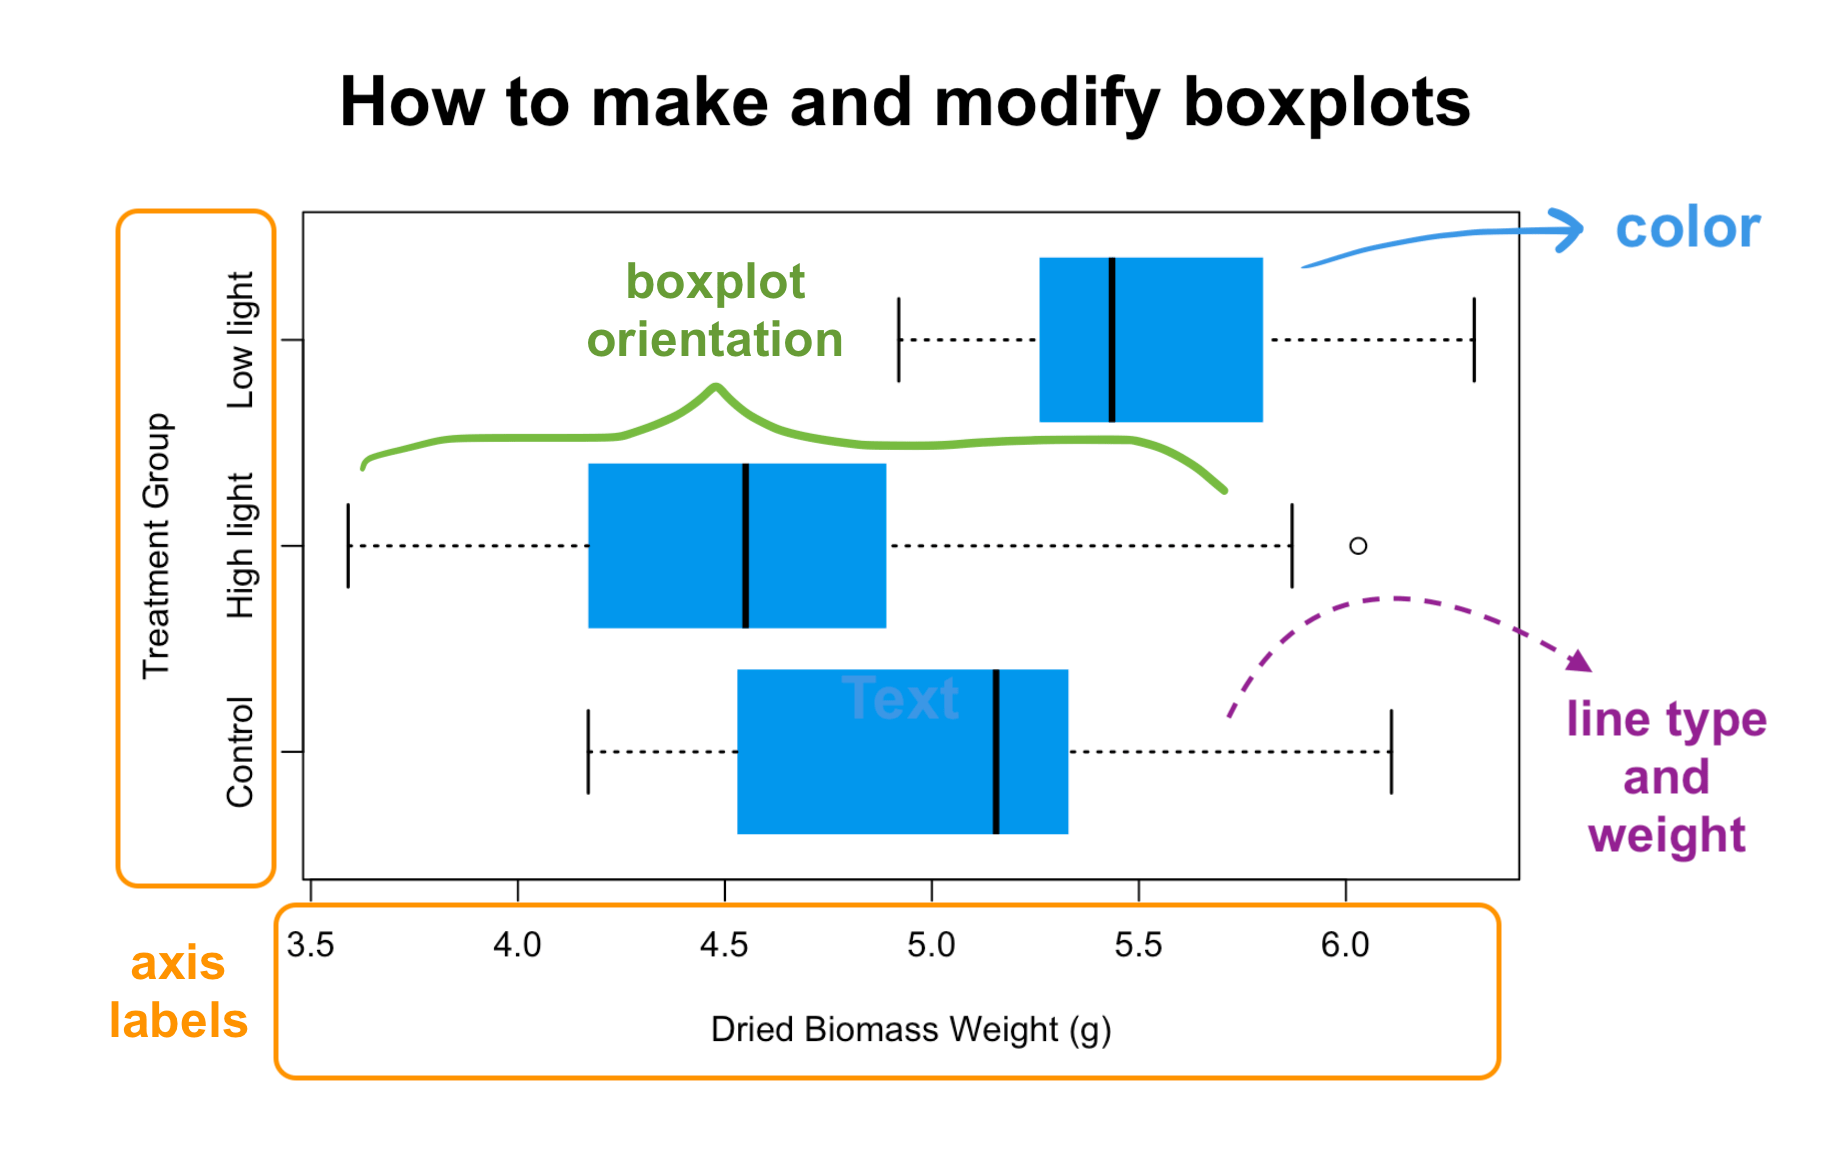 An example boxplot showing all the different elements including color, axis labels, line type and weight, and boxplot orientation.